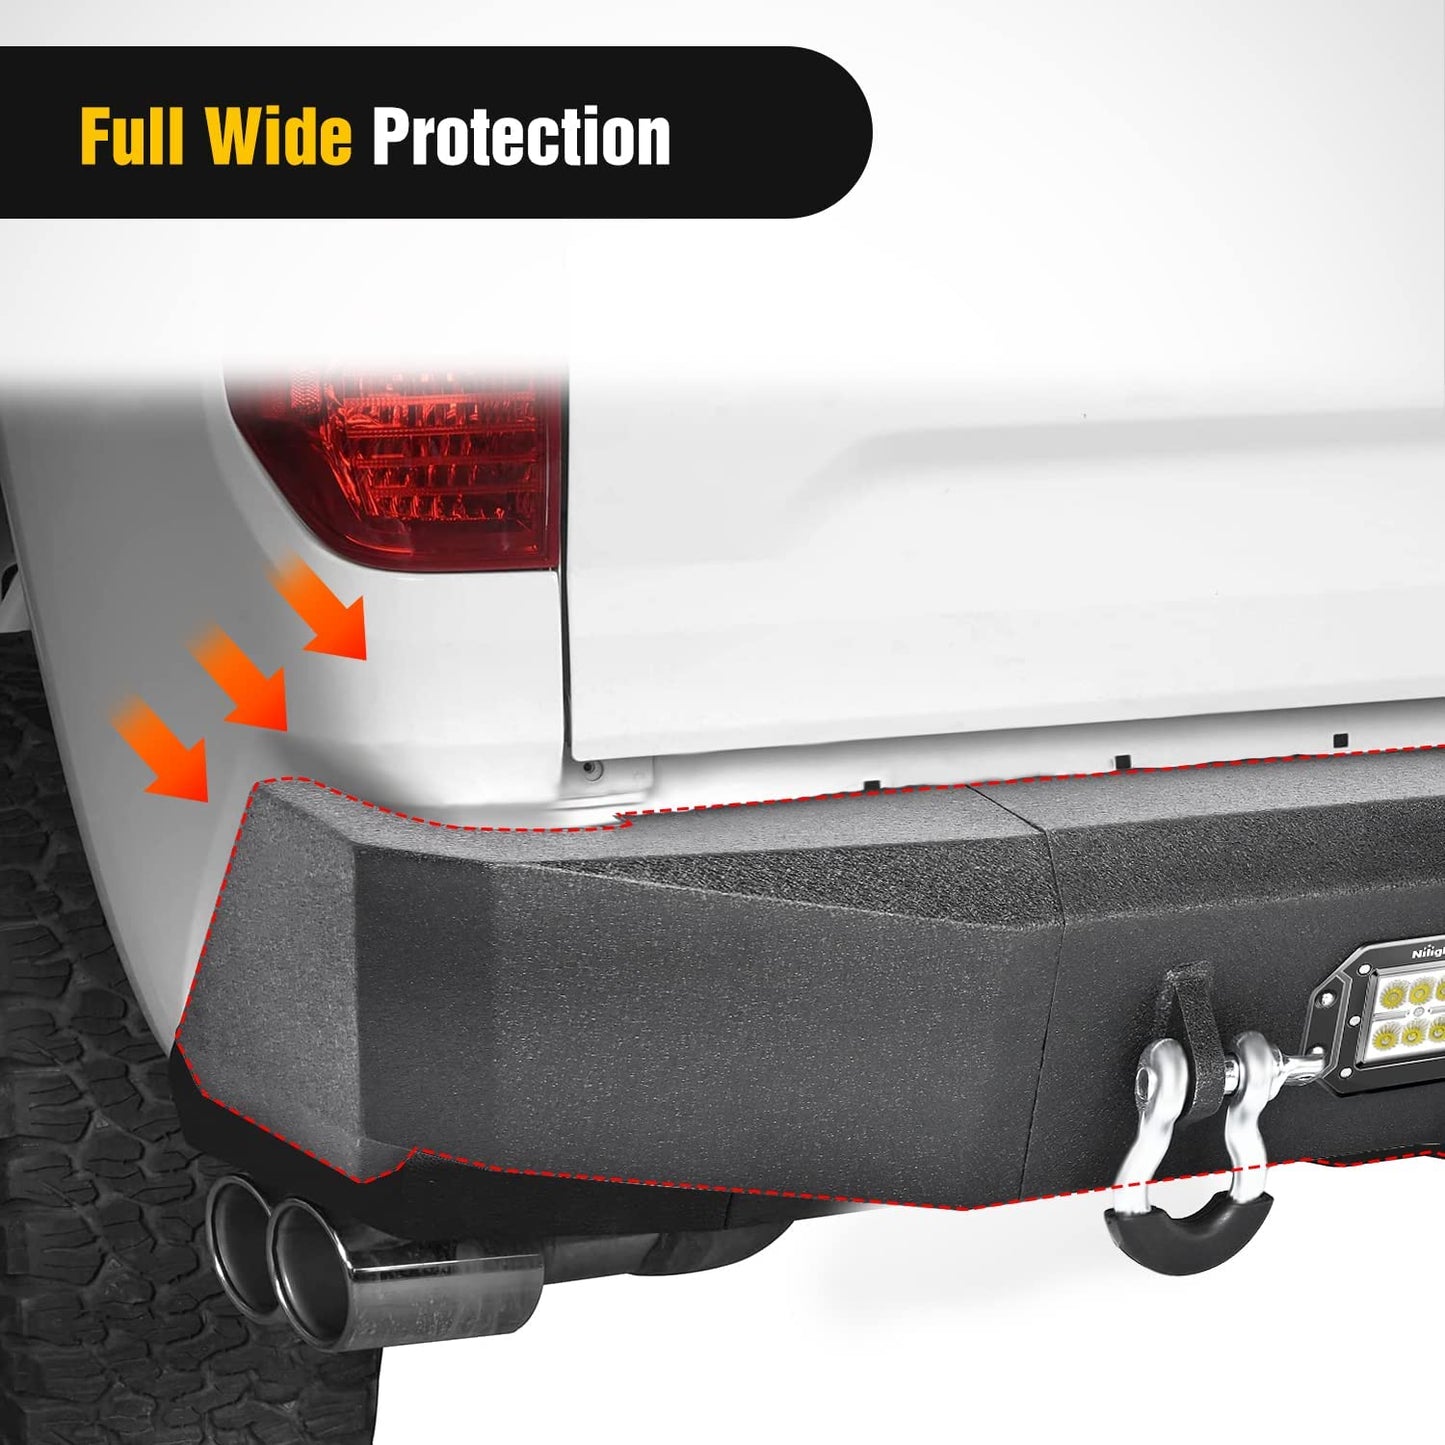 Full Wide Protection of Nilight Rear Step Bumper For 2014-2021 Toyota Tundra